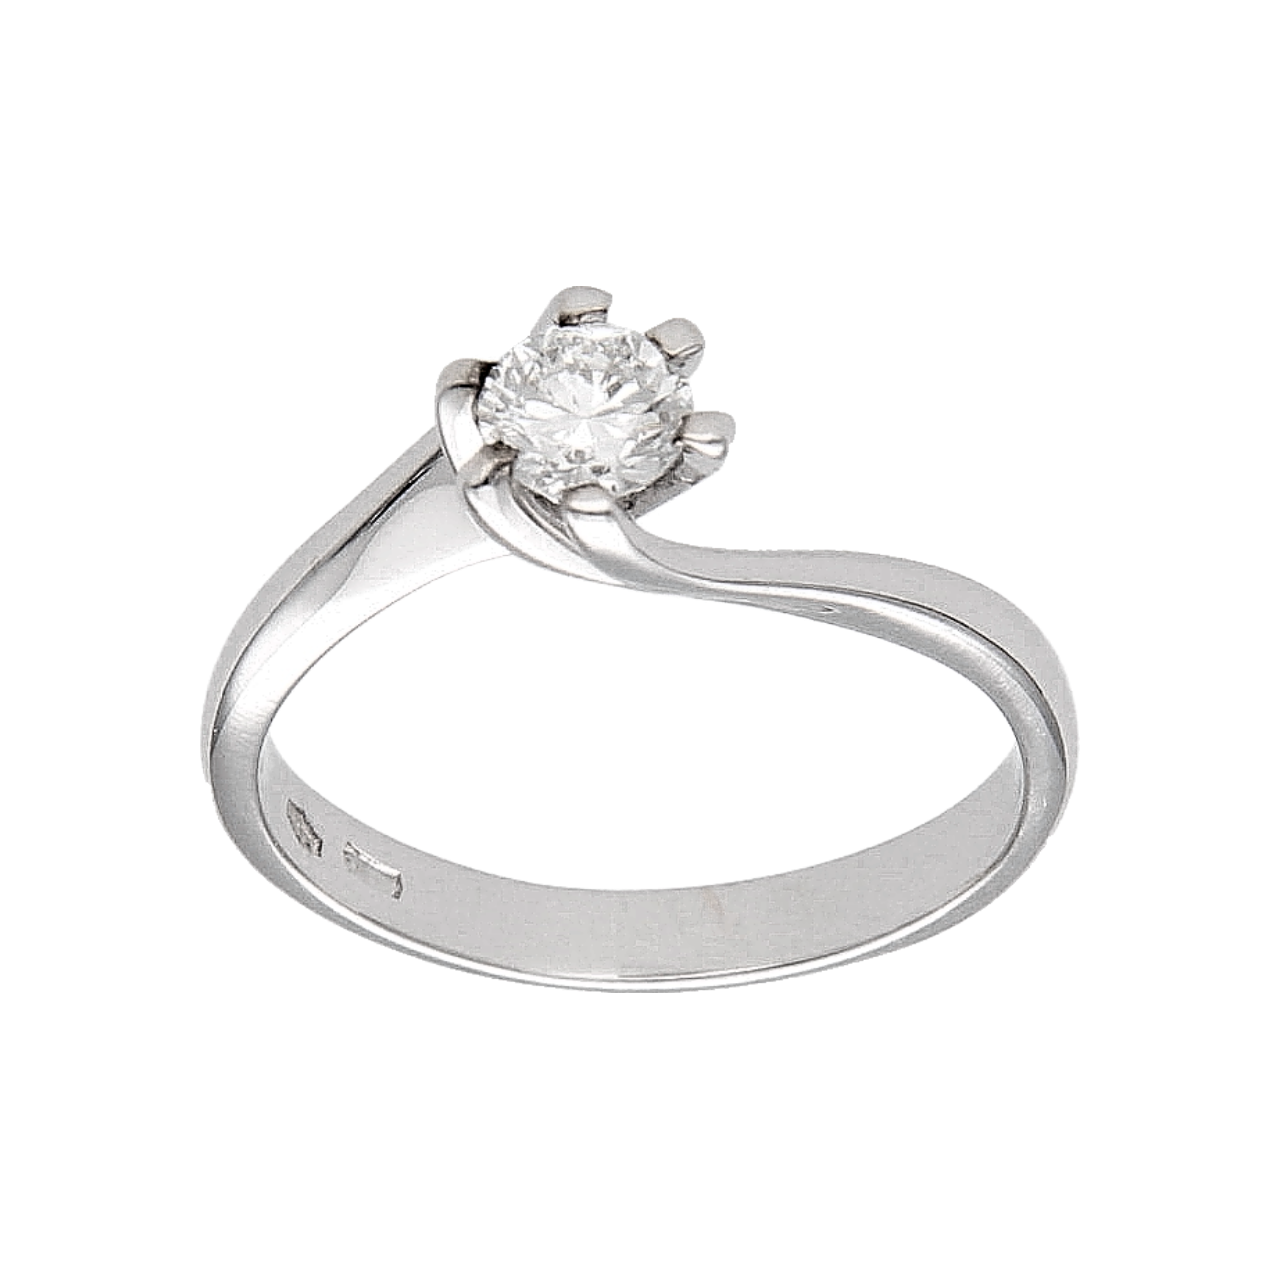 White gold solitaire ring with 0.60 ct. diamond F/IF